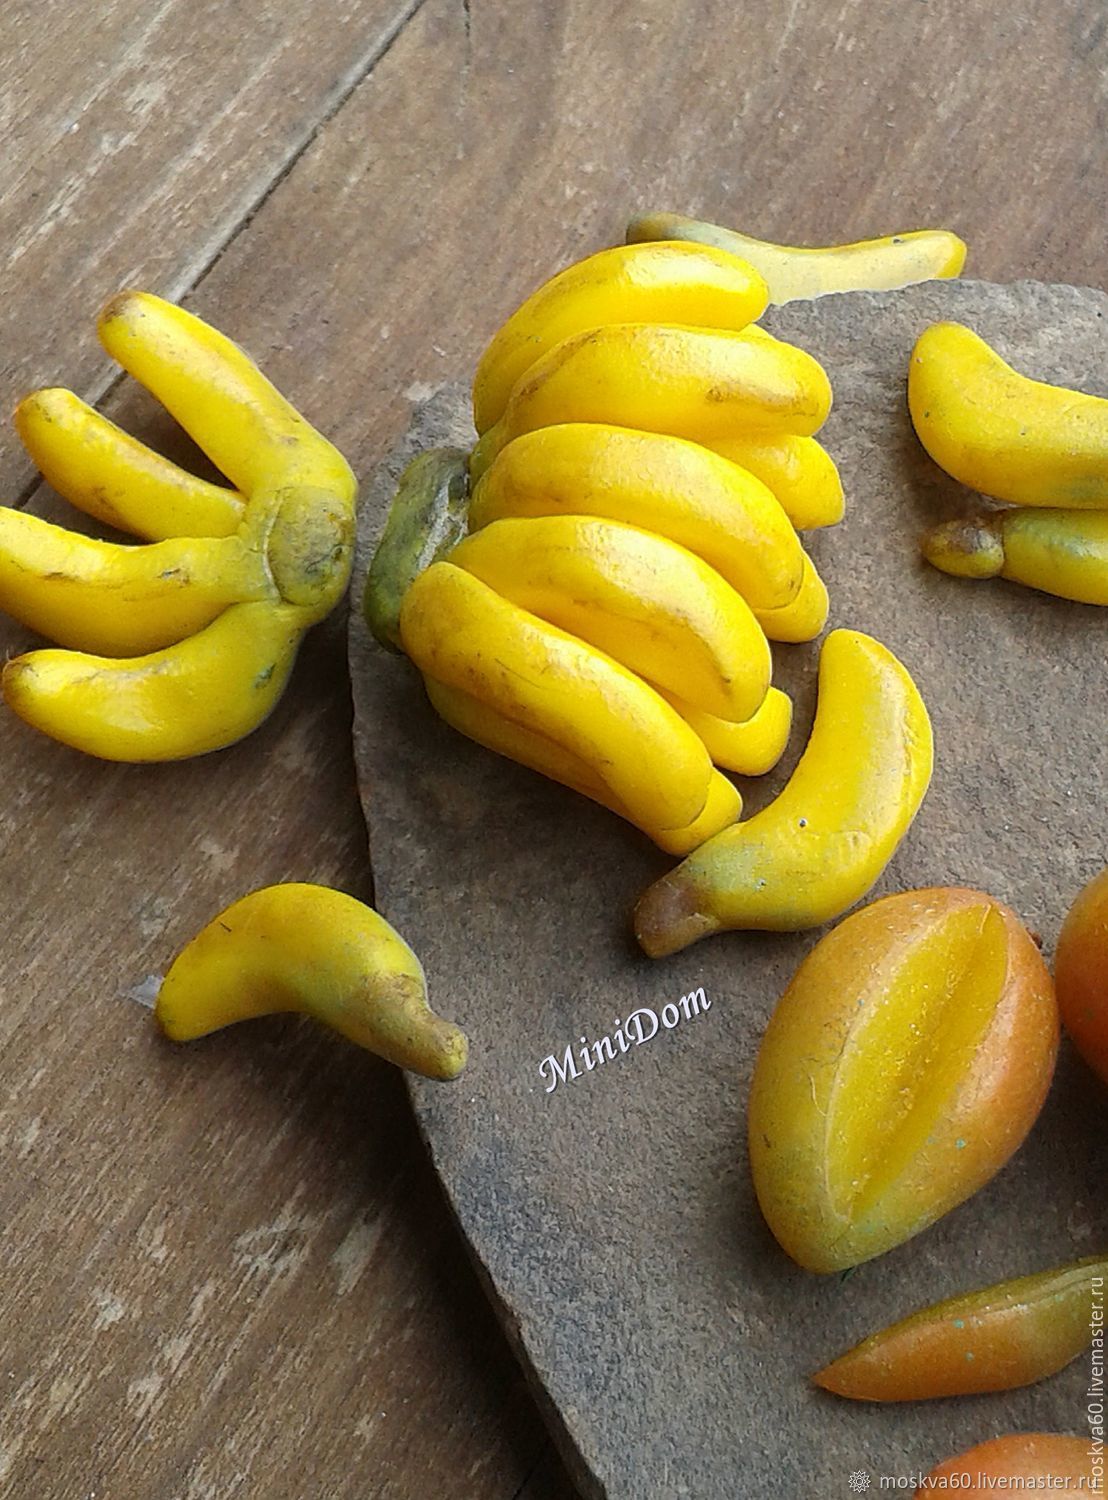 Exotic fruit for doll house - Dollhouse miniature – купить на Ярмарке ...